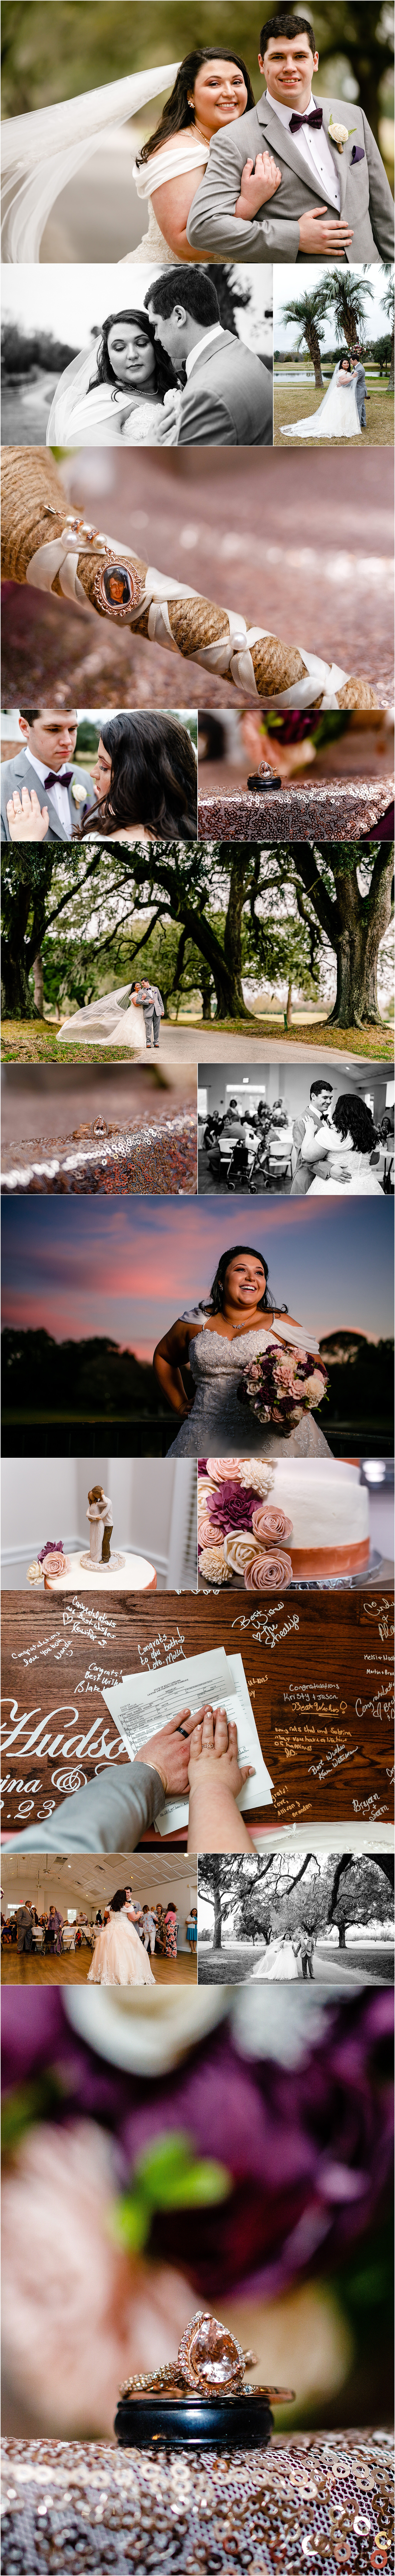 Curvy Bride, Southern, Lowcountry, Moncks Corner, Wedding photographer, wedding day, bride and groom, morganite ring, palm trees, cory lee photography, CLPwedding, Bridal Session, Berkeley Country Club, Golf Course Wedding